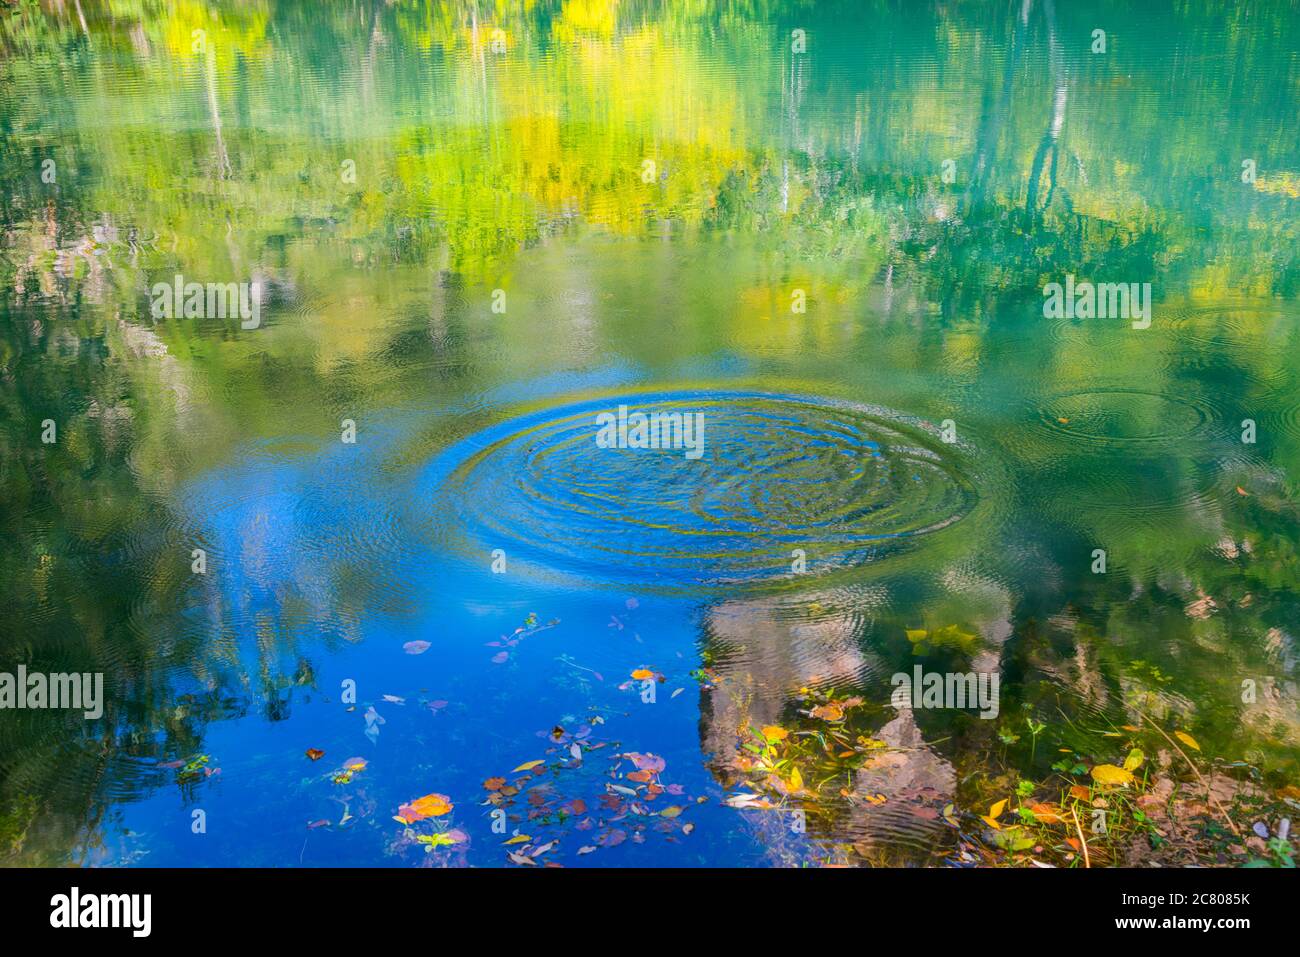 Ripples and reflections on water. Stock Photo